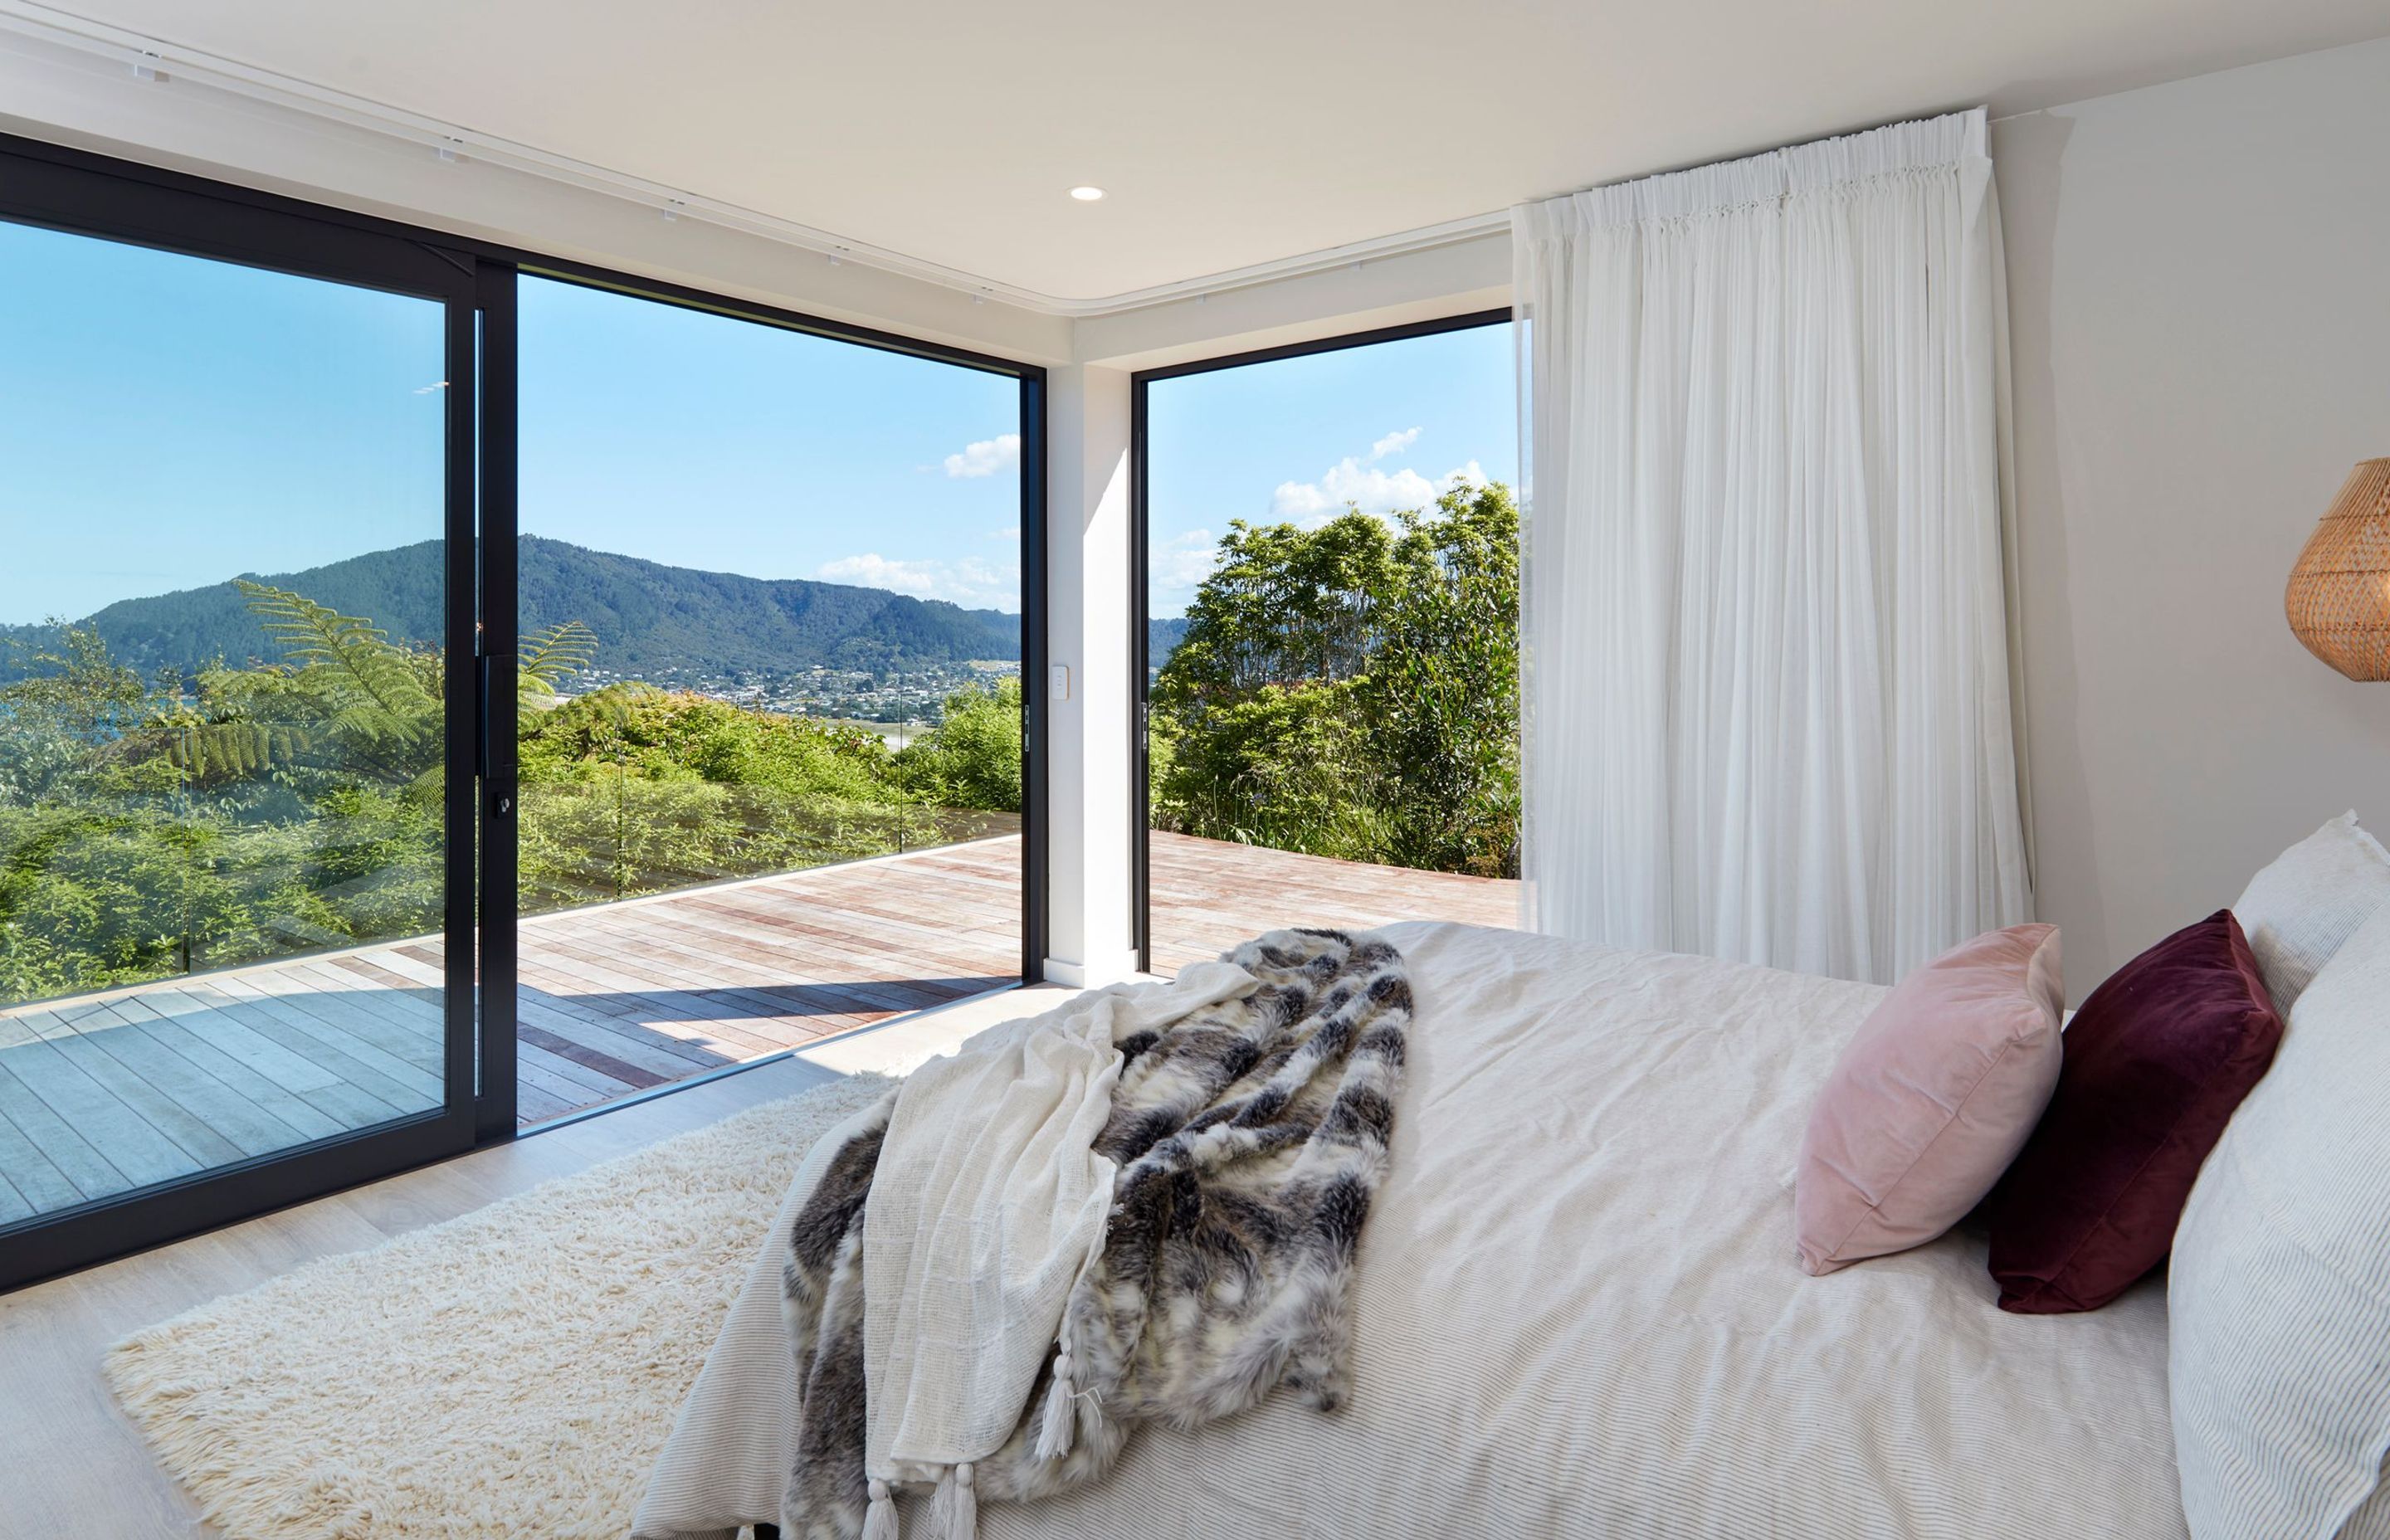 The main bedroom is positioned at the front of the home and the CurtainStudio team in Whitianga suggested the floaty white drapes to emphasise the holiday feel.